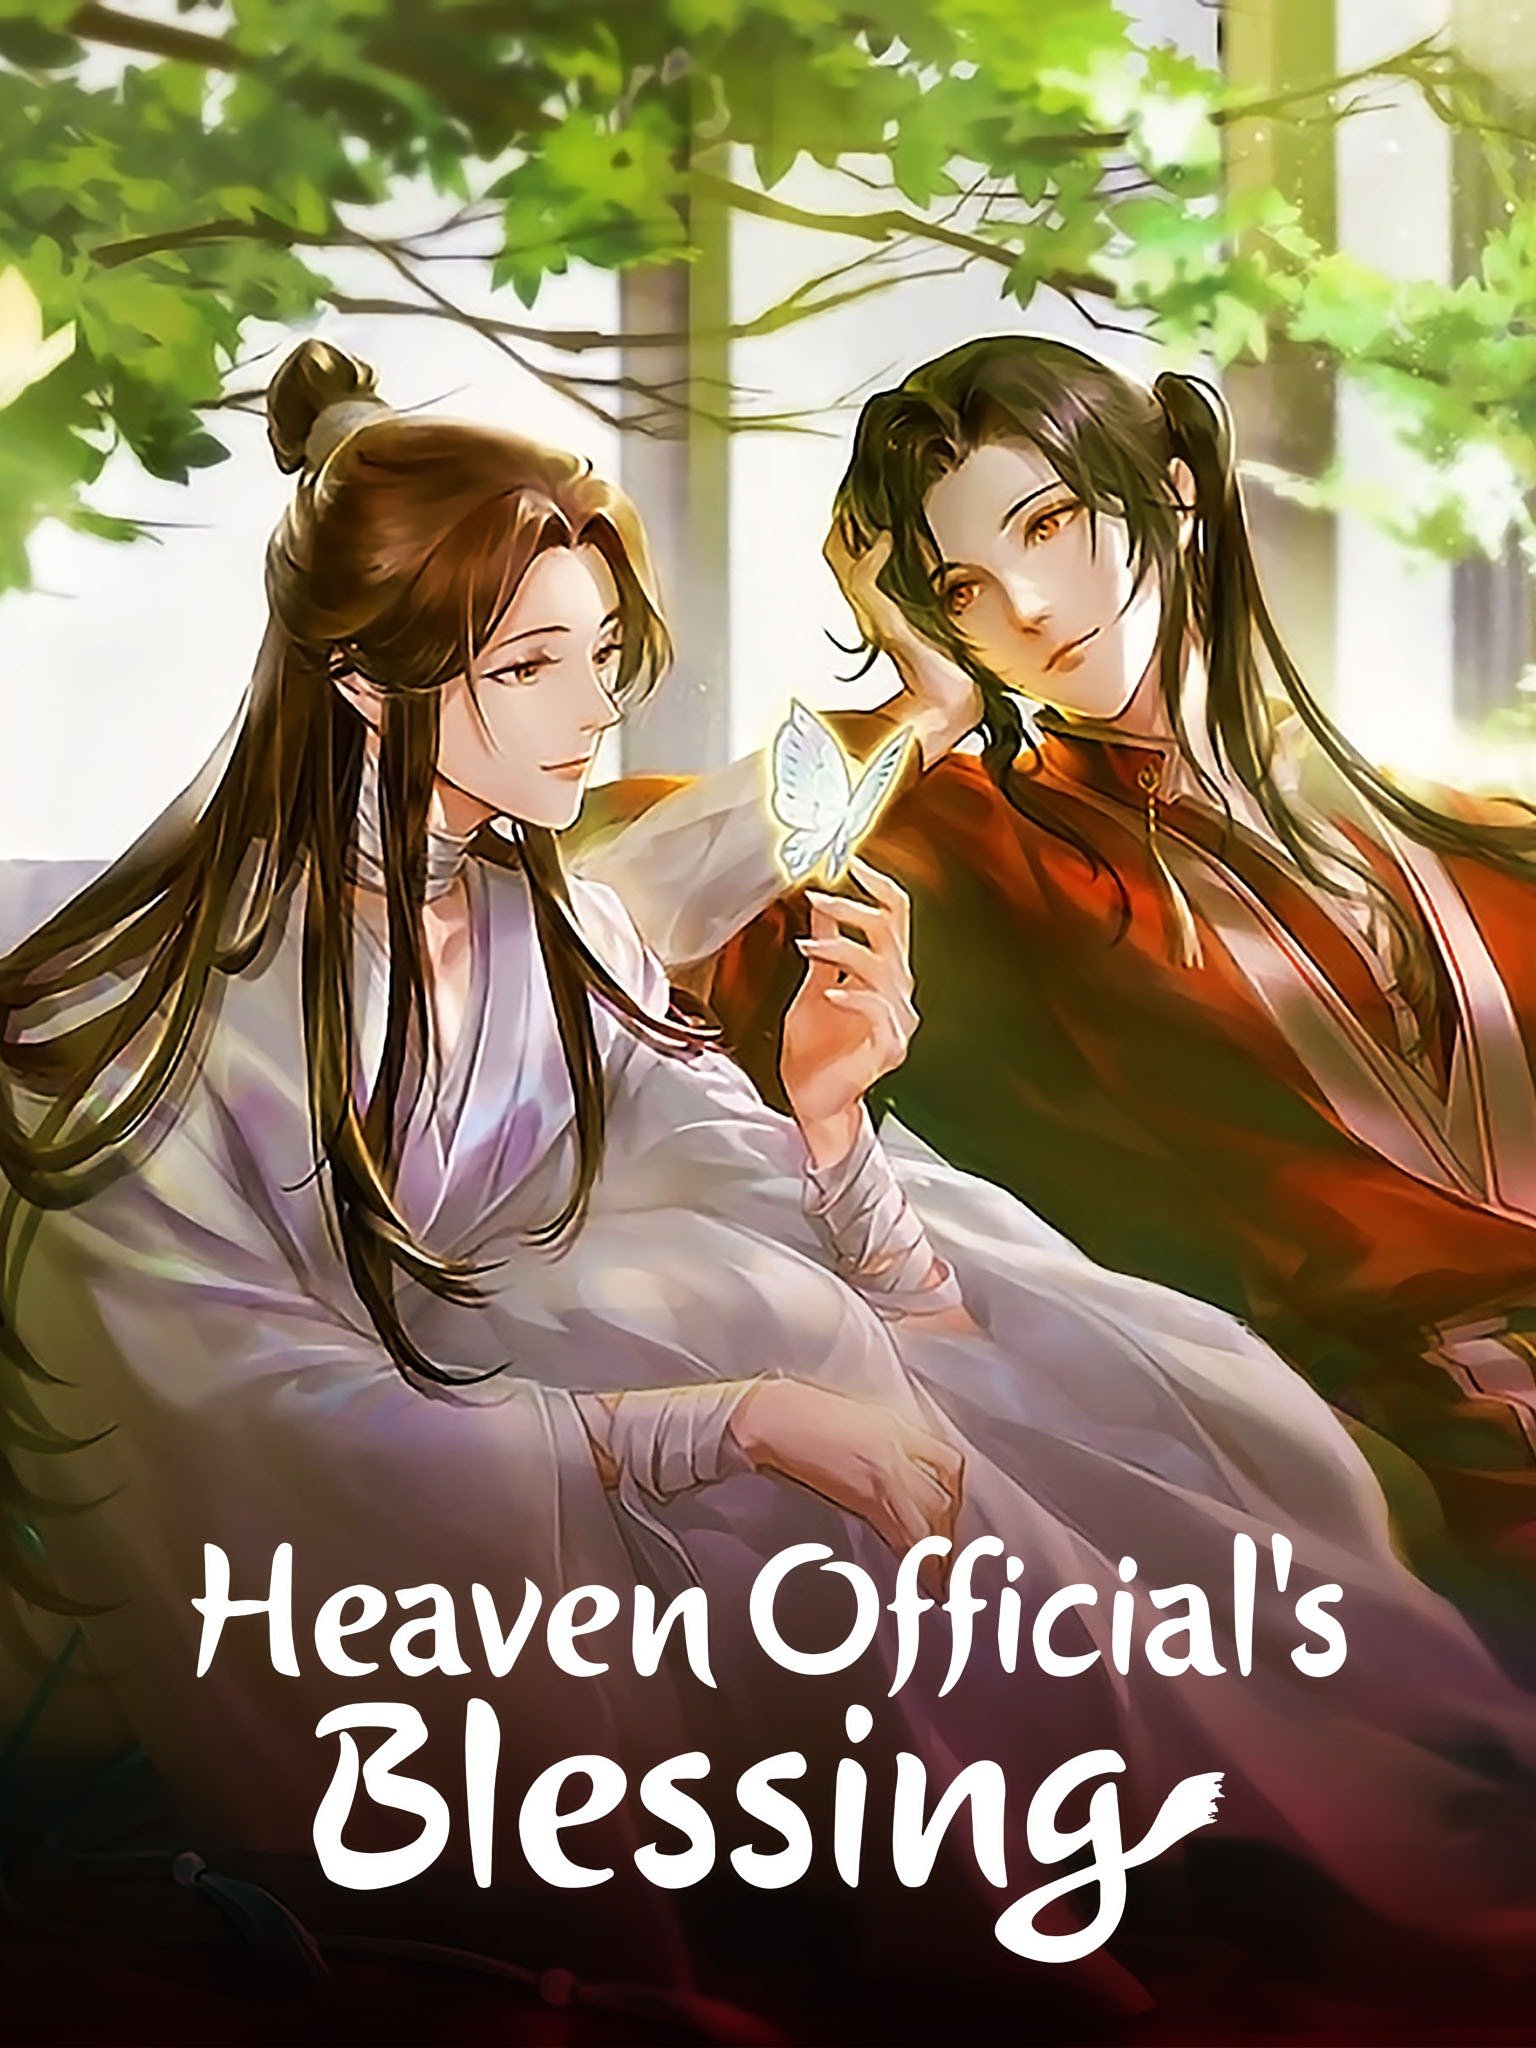 100+] Heaven Officials Blessing Wallpapers | Wallpapers.com